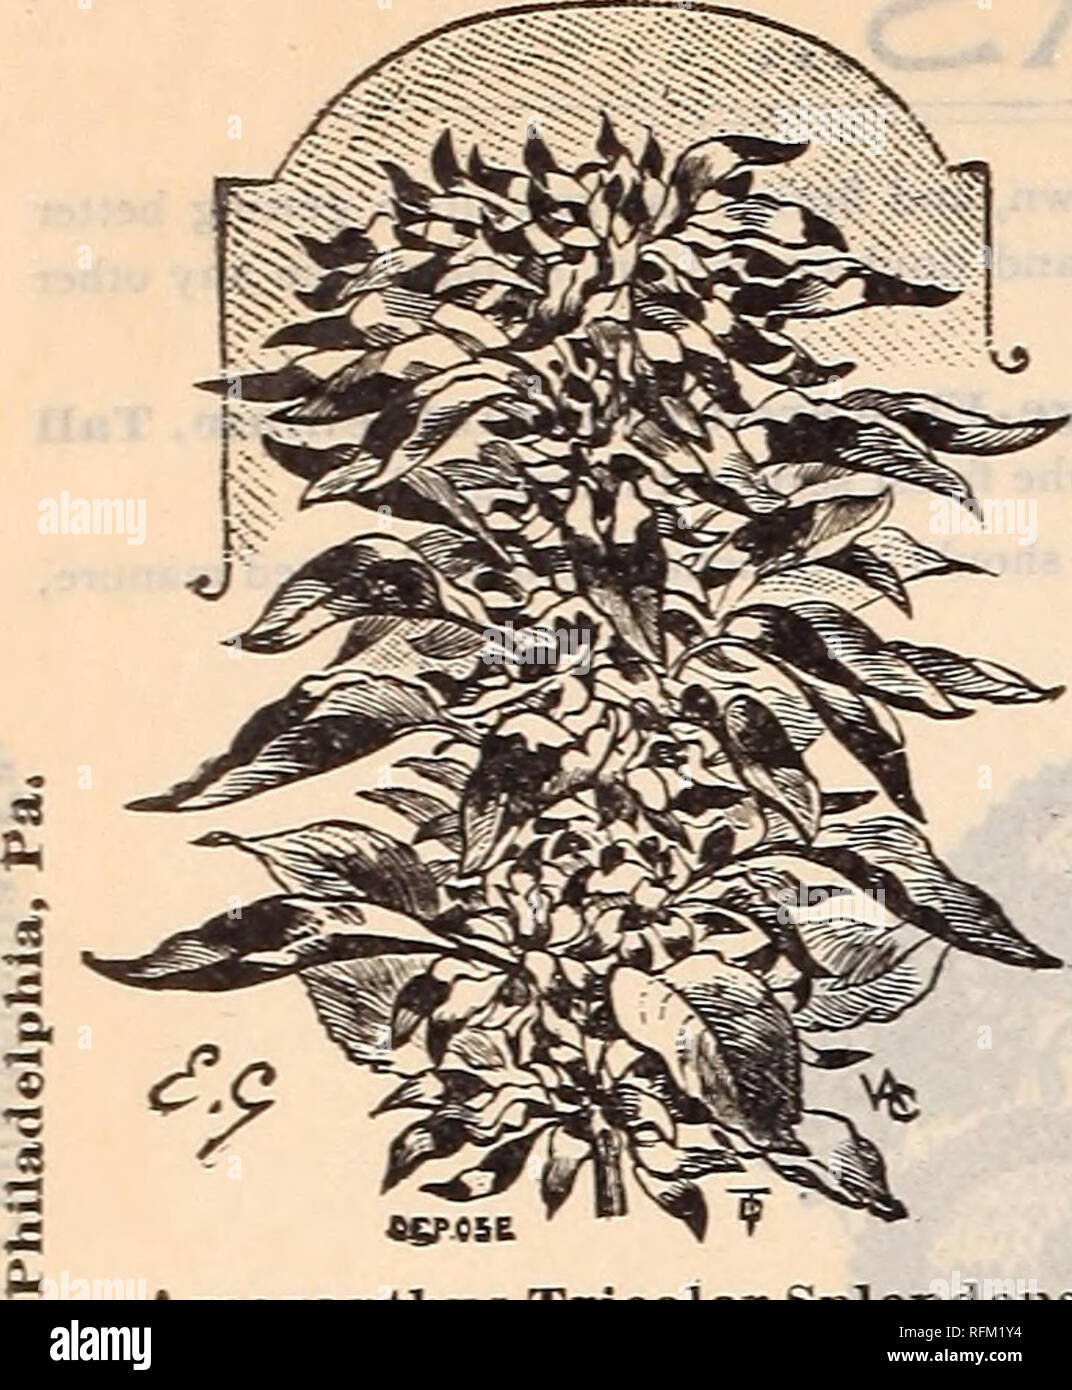 . Key to profit in the garden. Nursery stock Pennsylvania Philadelphia Catalogs; Vegetables Seeds Catalogs; Flowers Seeds Catalogs; Agricultural implements Catalogs. A marautlms Tricolor Splendens. AMARANTHUS. Ornamental foliage and flowering an- nuals of striking effect; they are of rapid growth, easy culture and very showy, with flower spikes or richly colored foliage. For semi-tropical gardening they are unique and effective; 3 feet. 80 C a ud at us (Love Lies Bleeding). Long racemes of curious looking, blood red, drooping flowers. Pkt. 5c, trade pkt. 10c. 81 Salicifolius (Fountain Plant).  Stock Photo